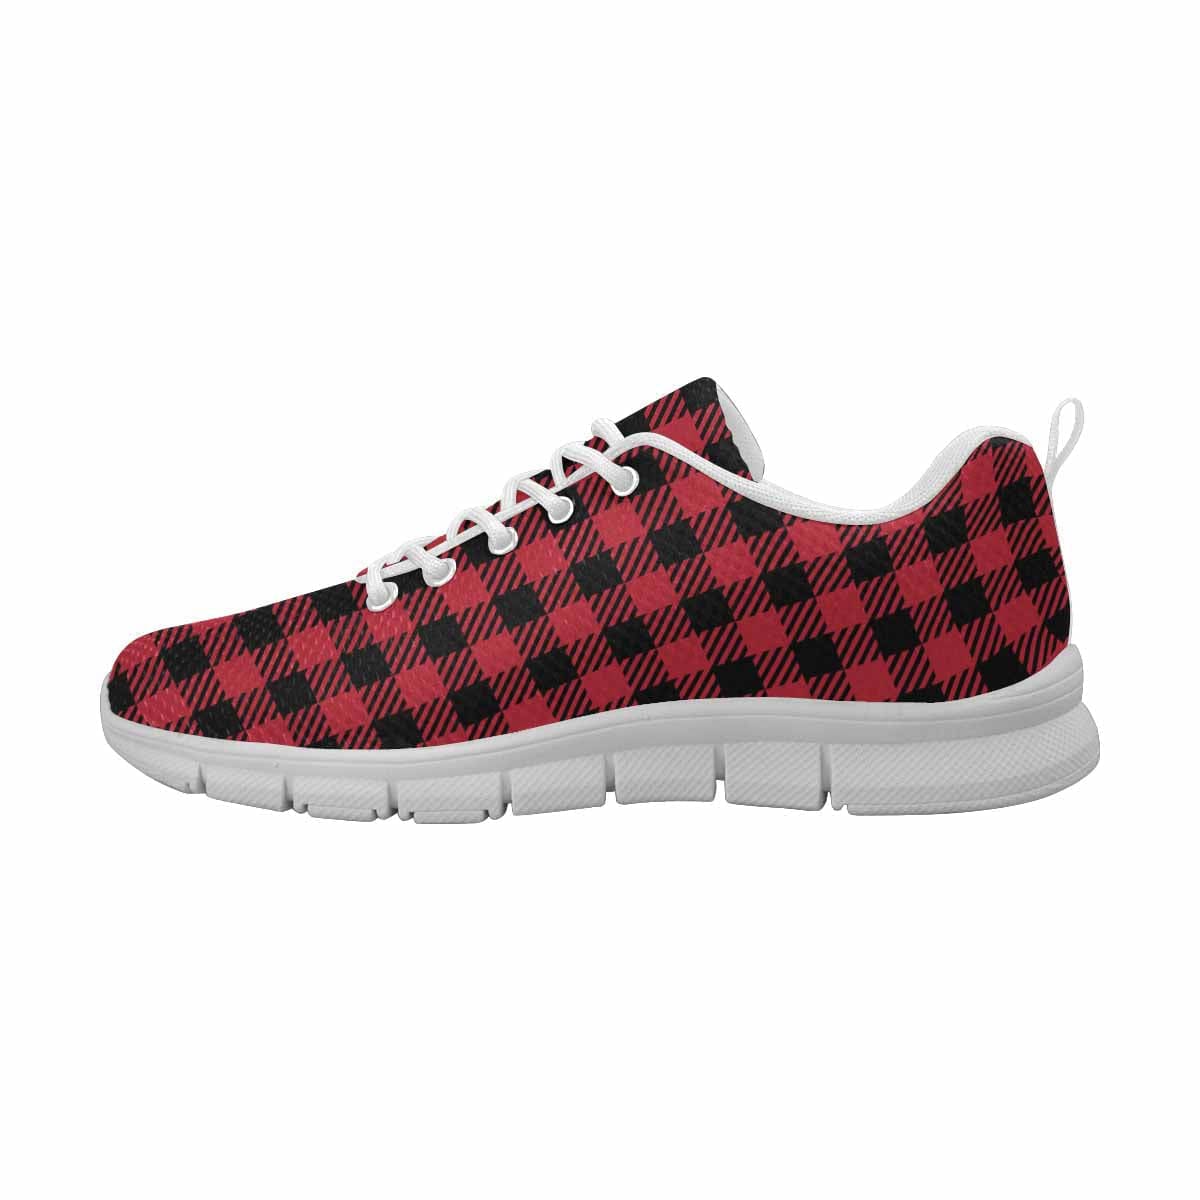 Sneakers For Men Buffalo Plaid Red And Black - Running Shoes Dg853 - Mens |